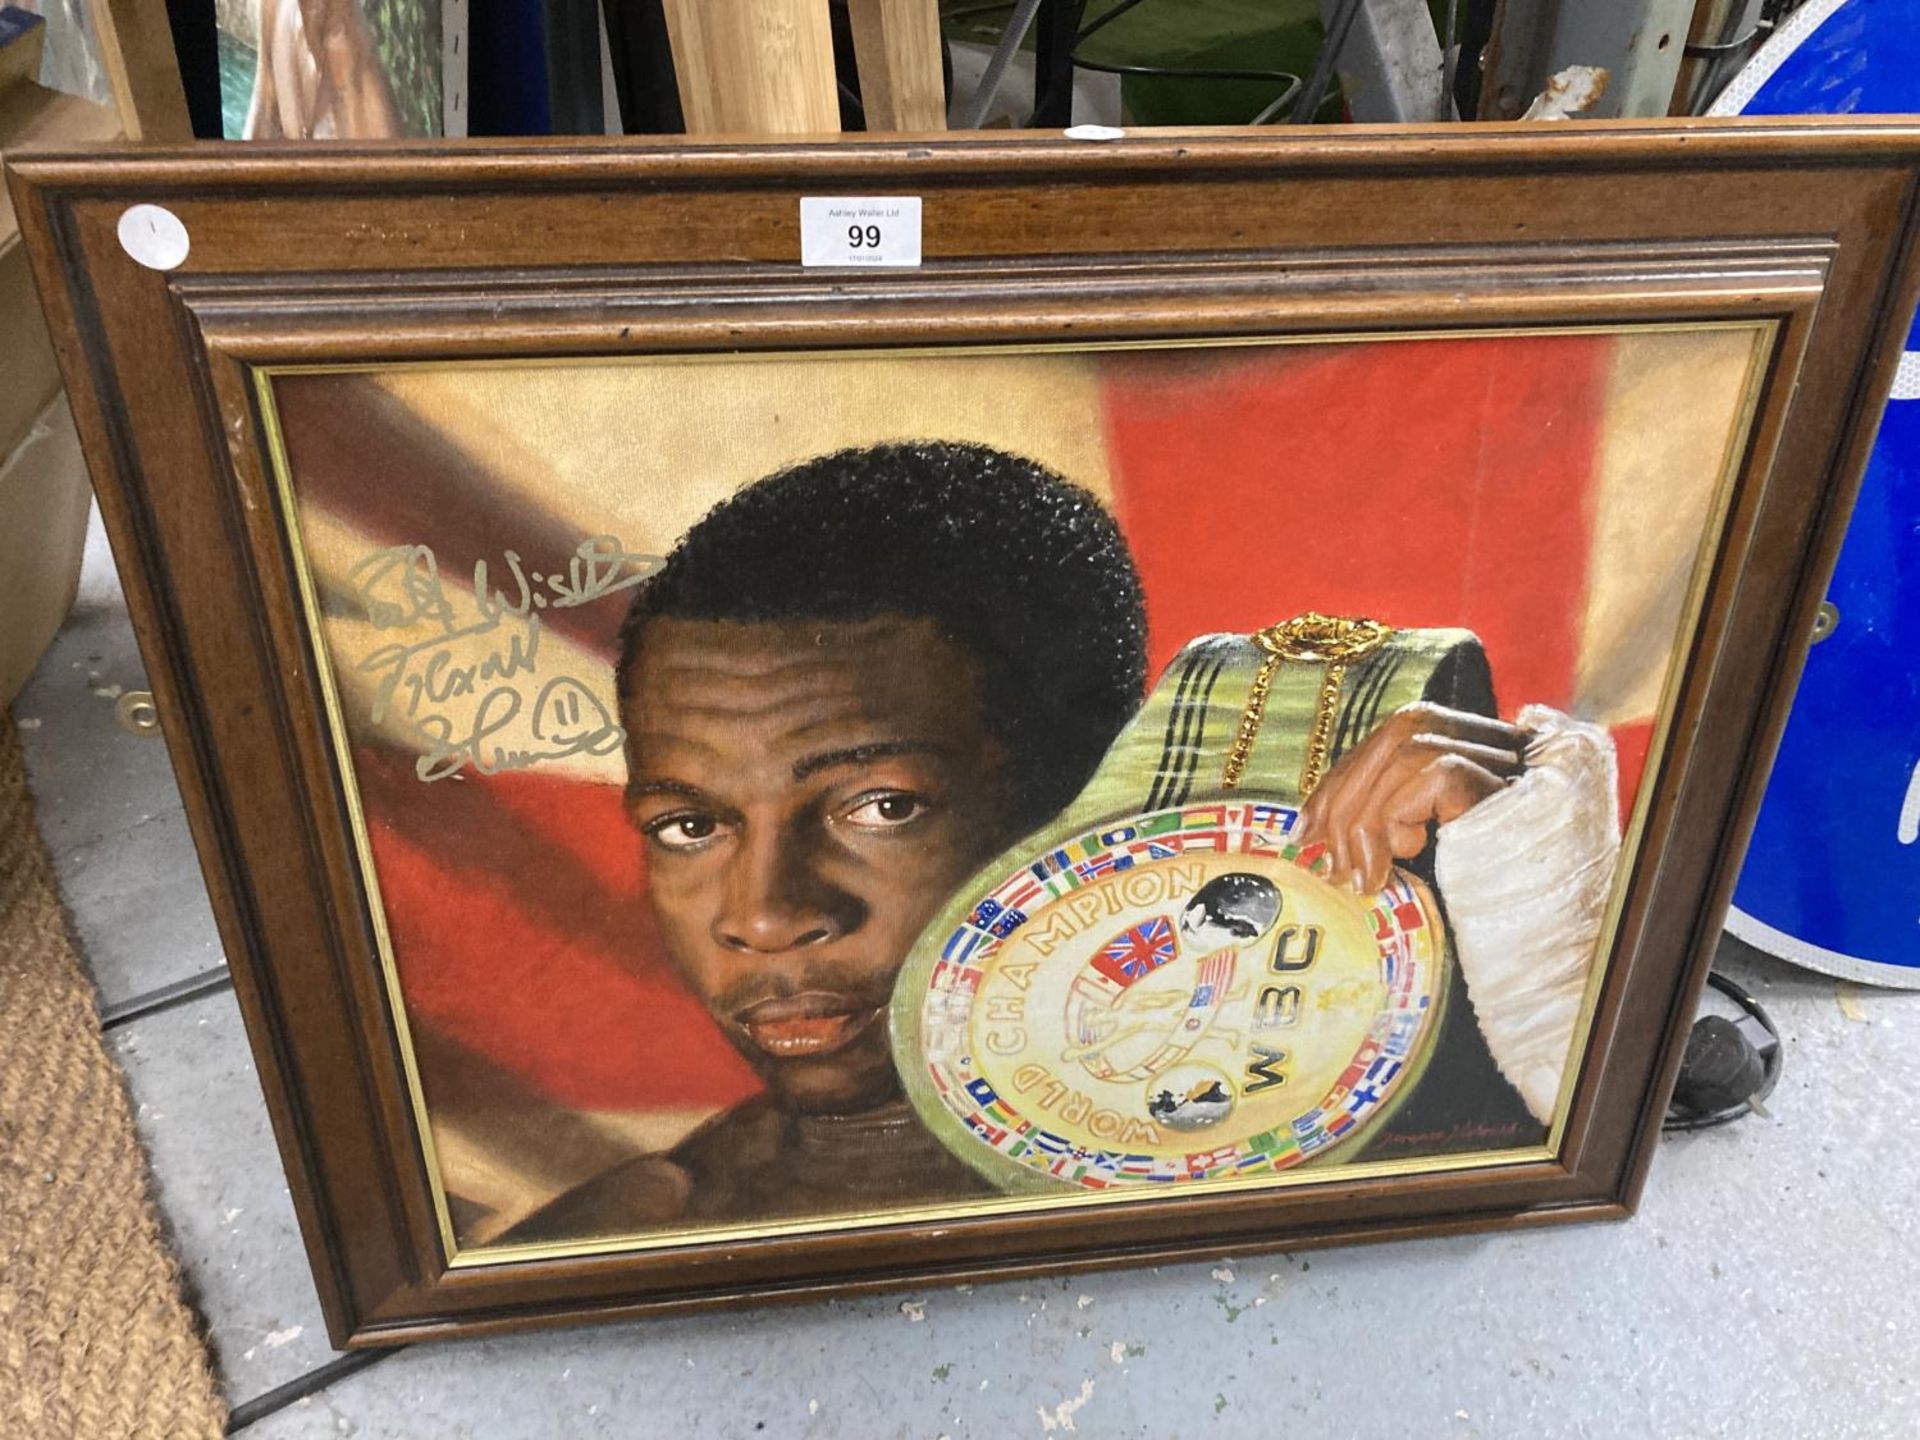 A FRAMED OIL PAINTING OF FRANK BRUNO WITH W.B.C BELT, SIGNED